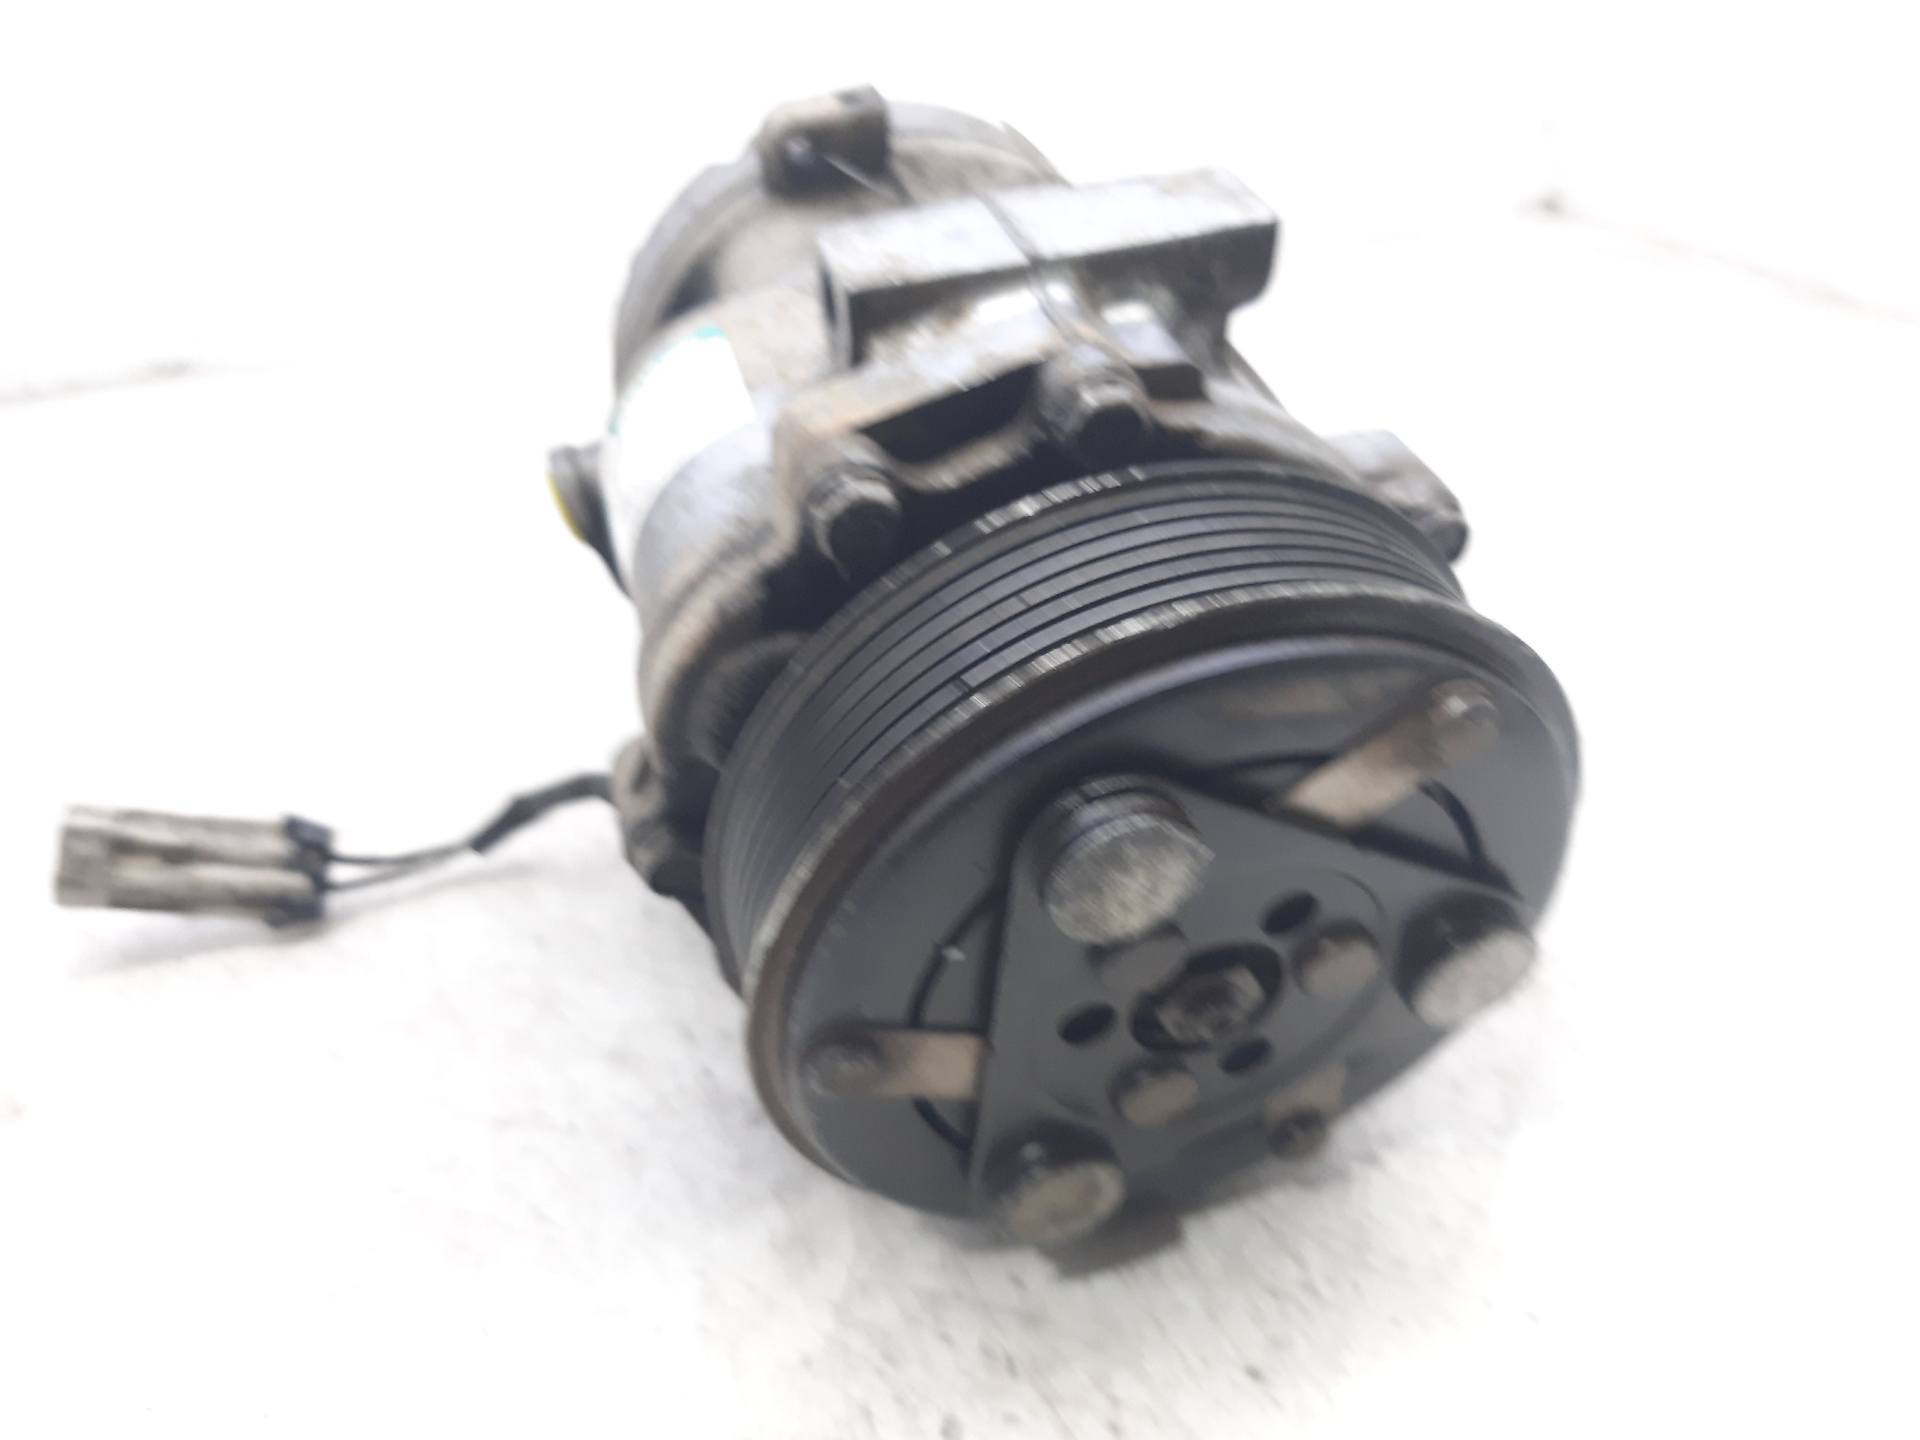 OPEL Combo C (2001-2011) Air Condition Pump 13197538 22436524